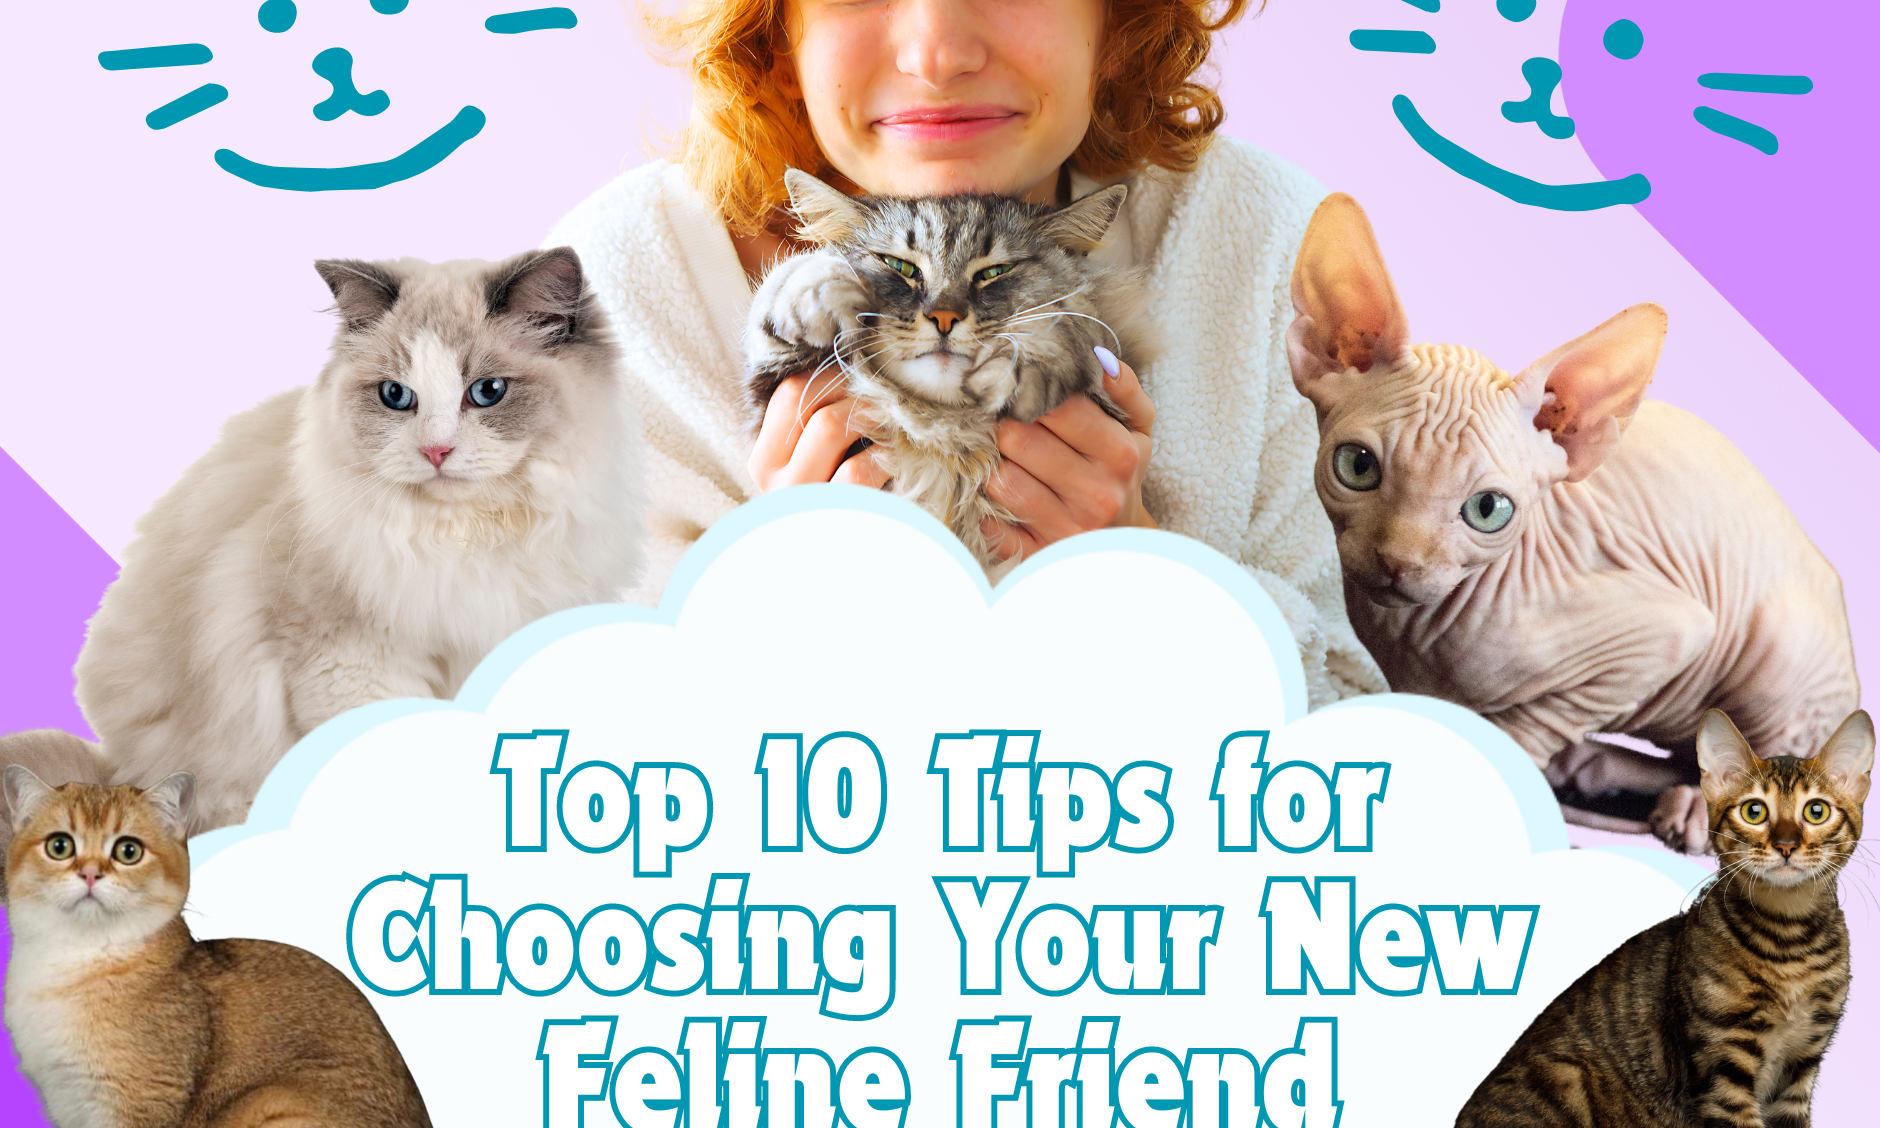 Finding the Perfect Kitten Top 10 Tips for Choosing Your New Feline Friend